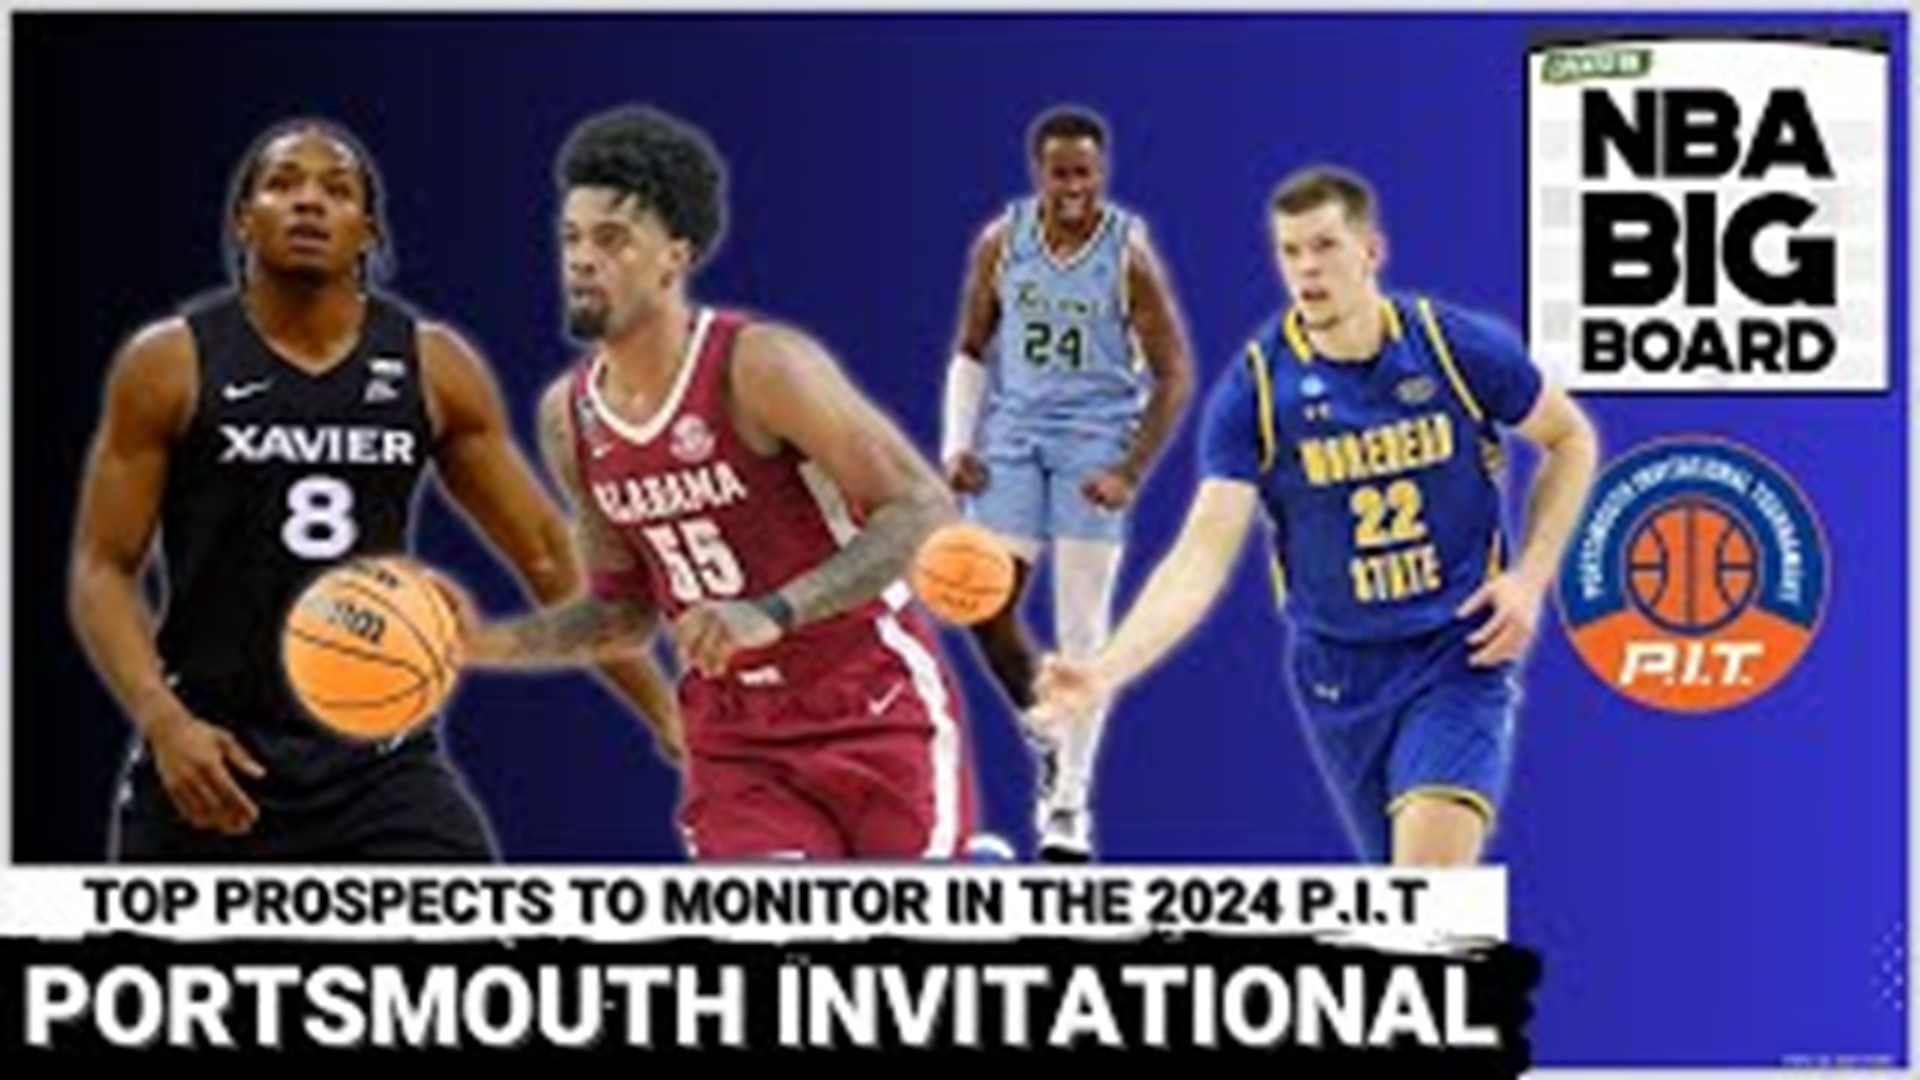 Richard Stayman recently joined Rafael Barlowe on the Locked On NBA Big Board podcast, offering keen insights into the 2024 Portsmouth Invitational Tournament.